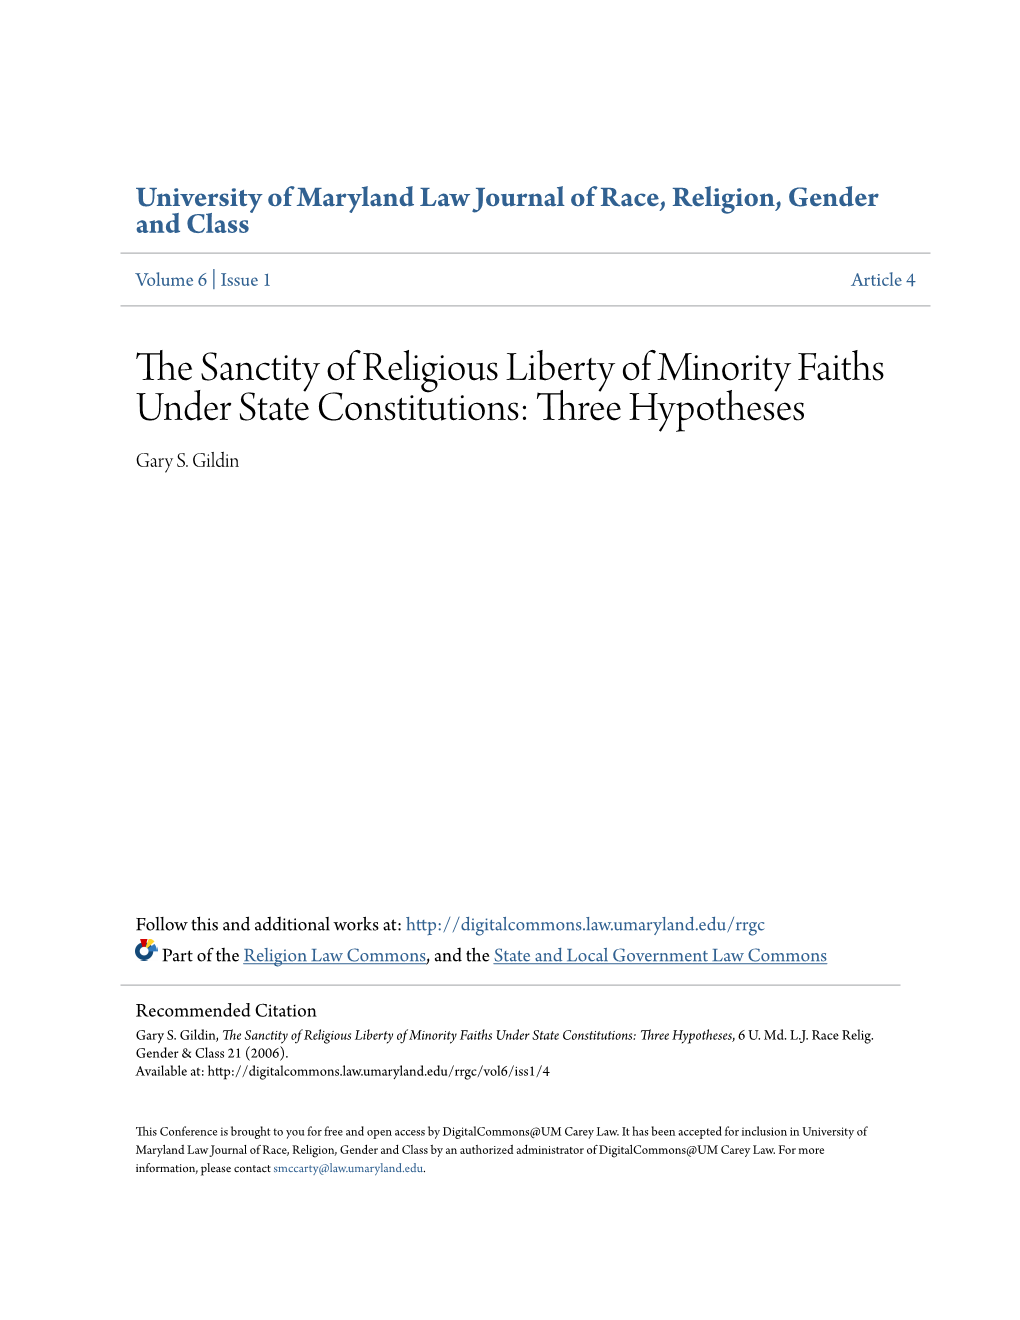 The Sanctity of Religious Liberty of Minority Faiths Under State Constitutions: Three Hypotheses, 6 U